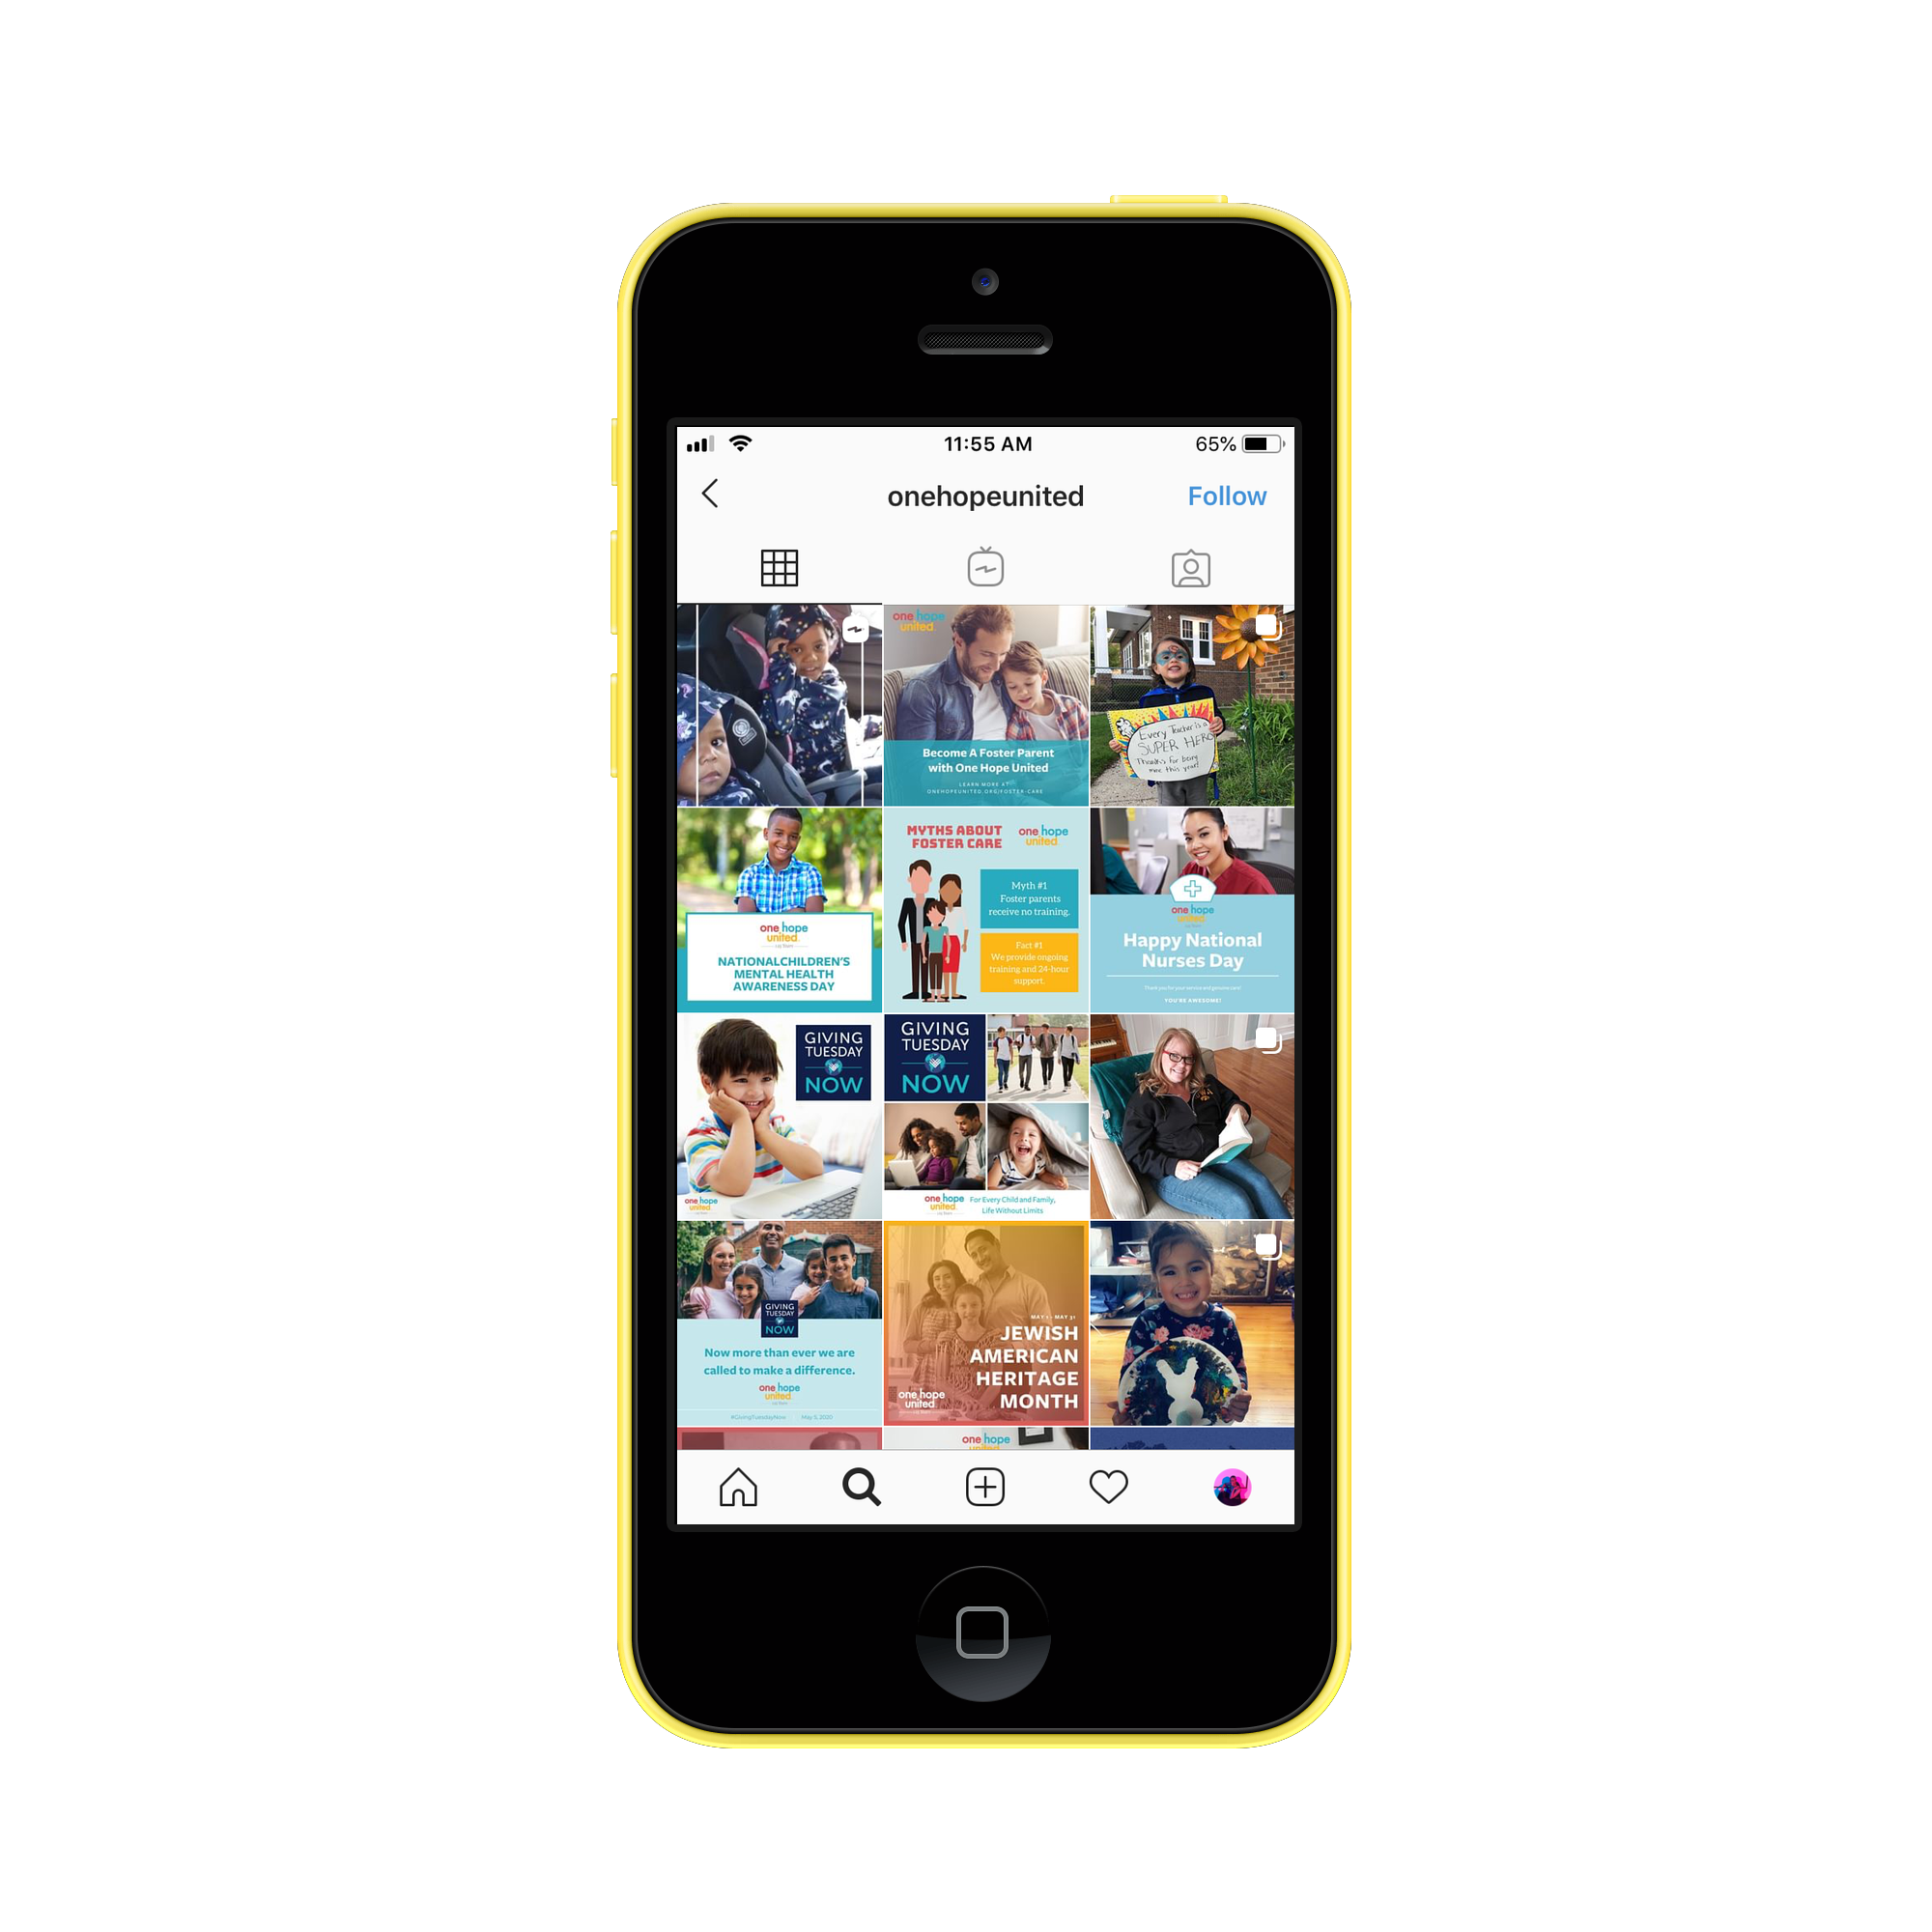 image1_iphone5c_yellow_portrait.png